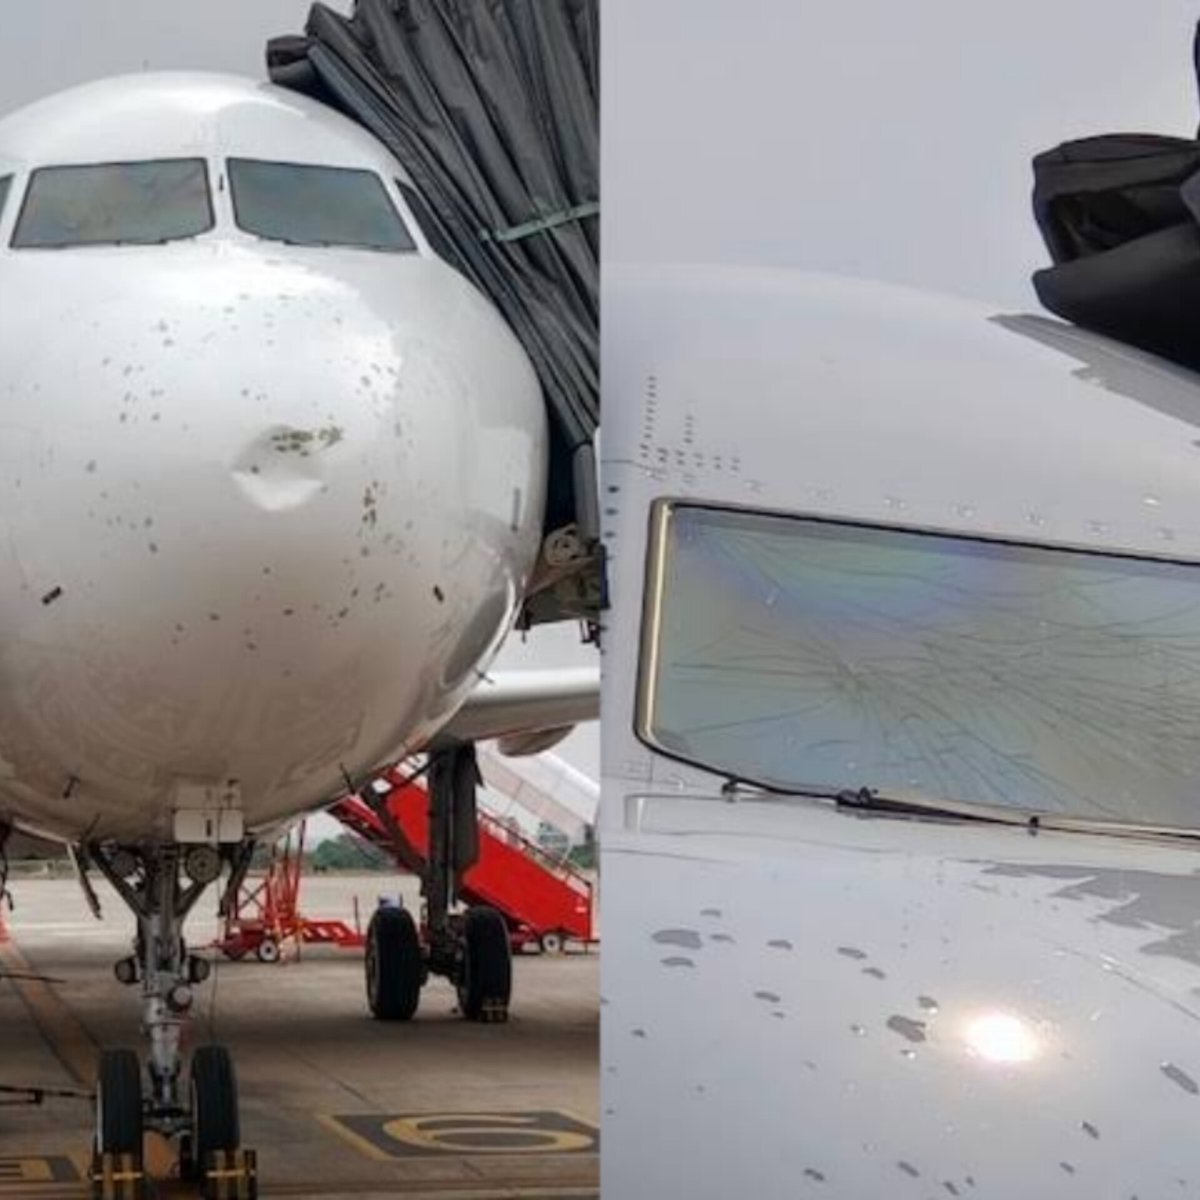 Emergency landing alert! A Vistara flight bound for Delhi had to land in Bhubaneswar after windshield damage. Thankfully, all passengers and crew are safe. 

Read more on shorts91.com/category/india

#Vistara #EmergencyLanding #Bhubaneswar #VistaraAirlines